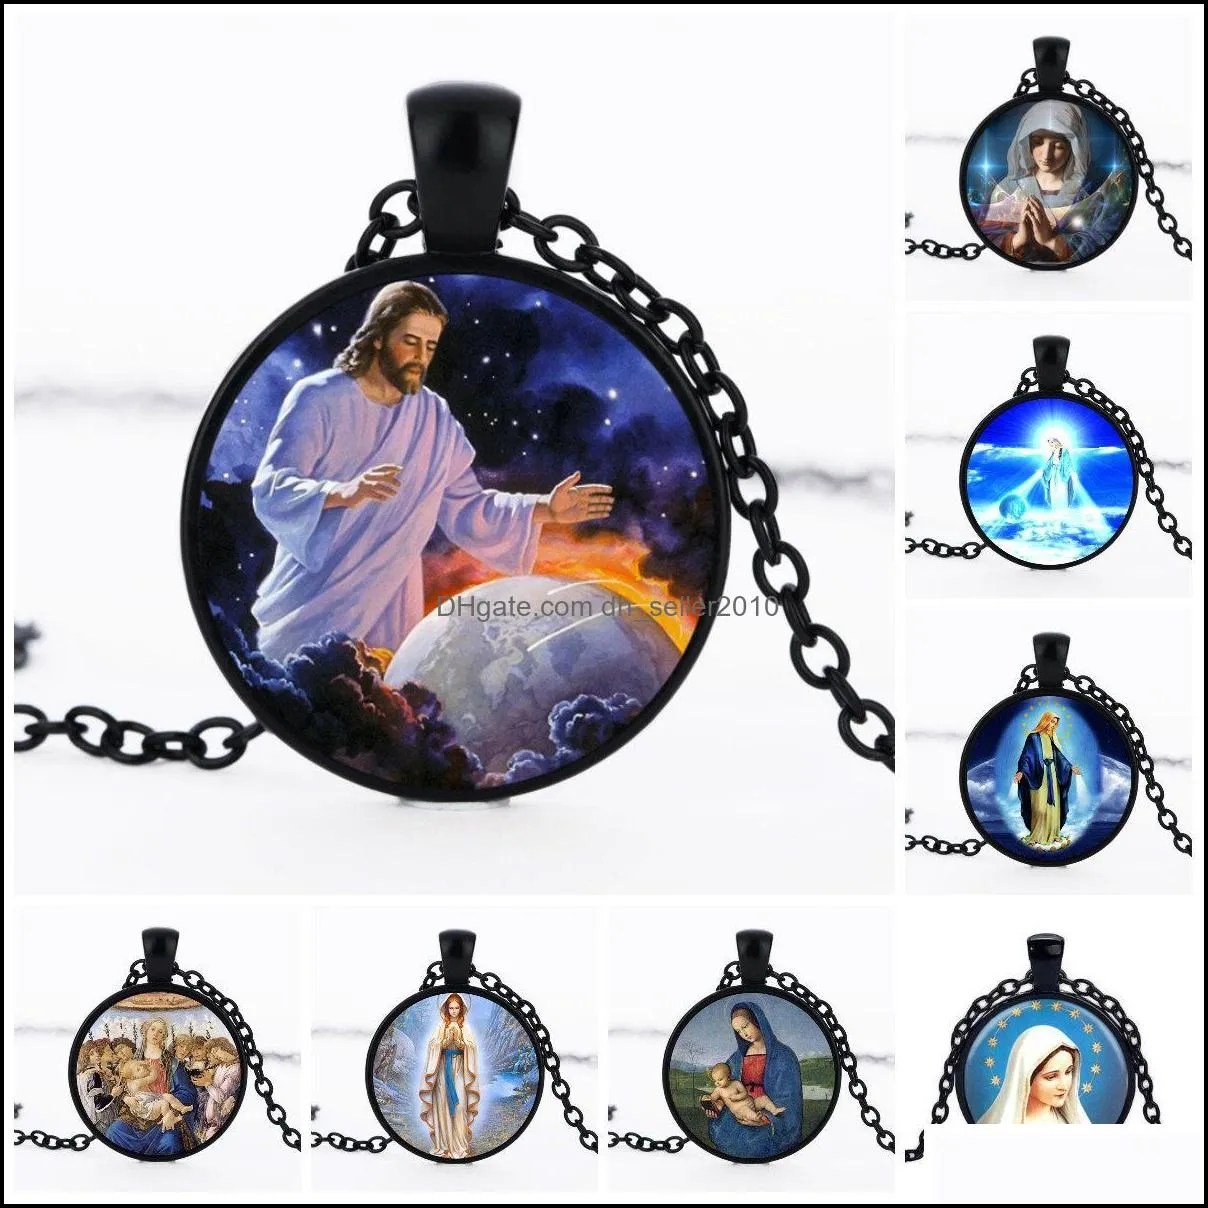 statement necklaces virgin mary pendant pure necklace christian stainless steel jewelry black vintage religious jesus chains necklaces